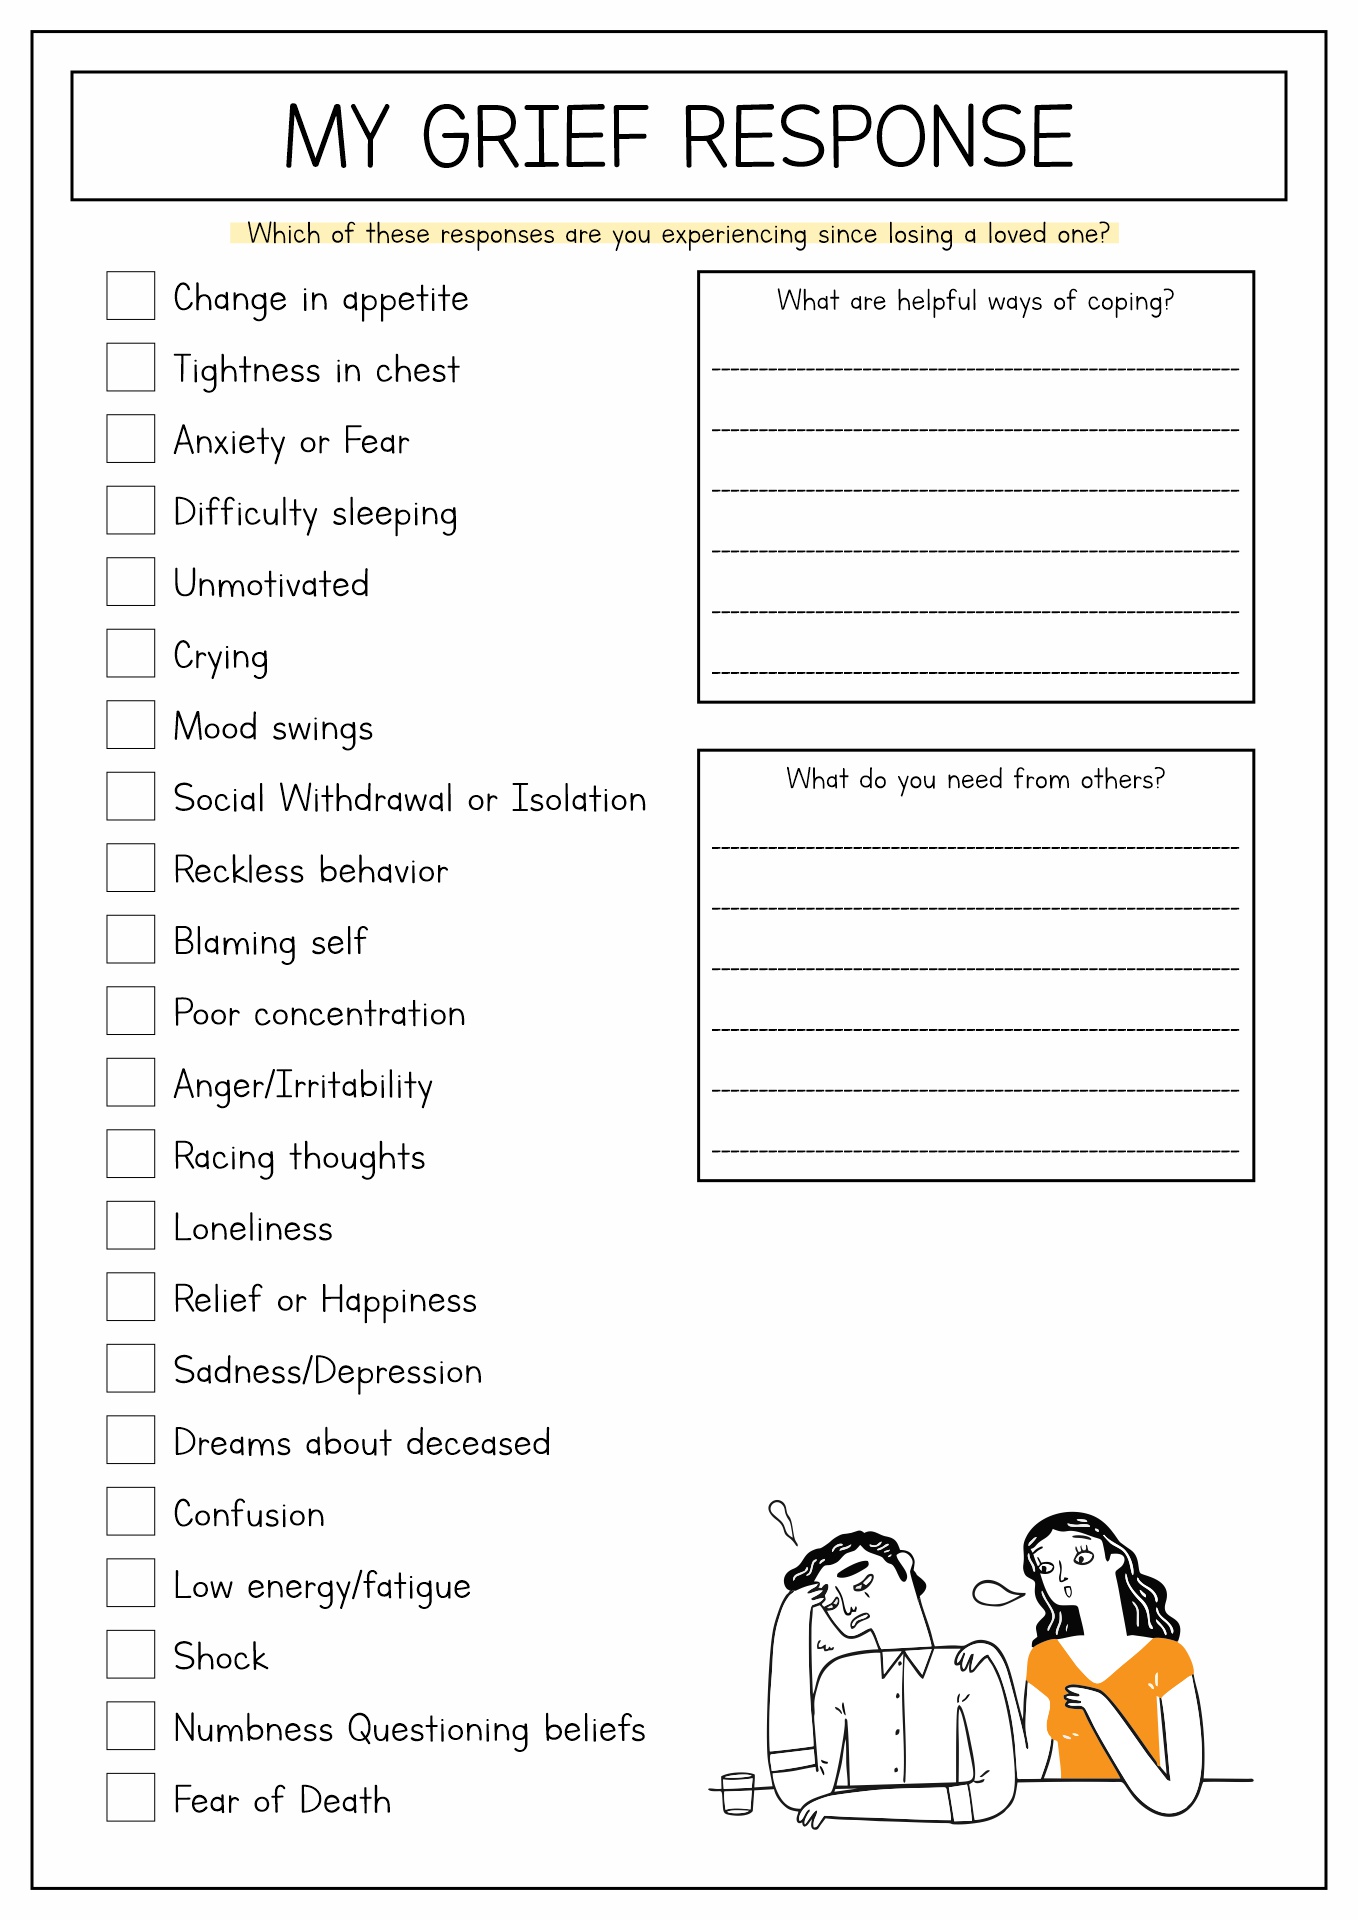 15-best-images-of-grief-therapy-worksheets-free-grief-worksheets-for